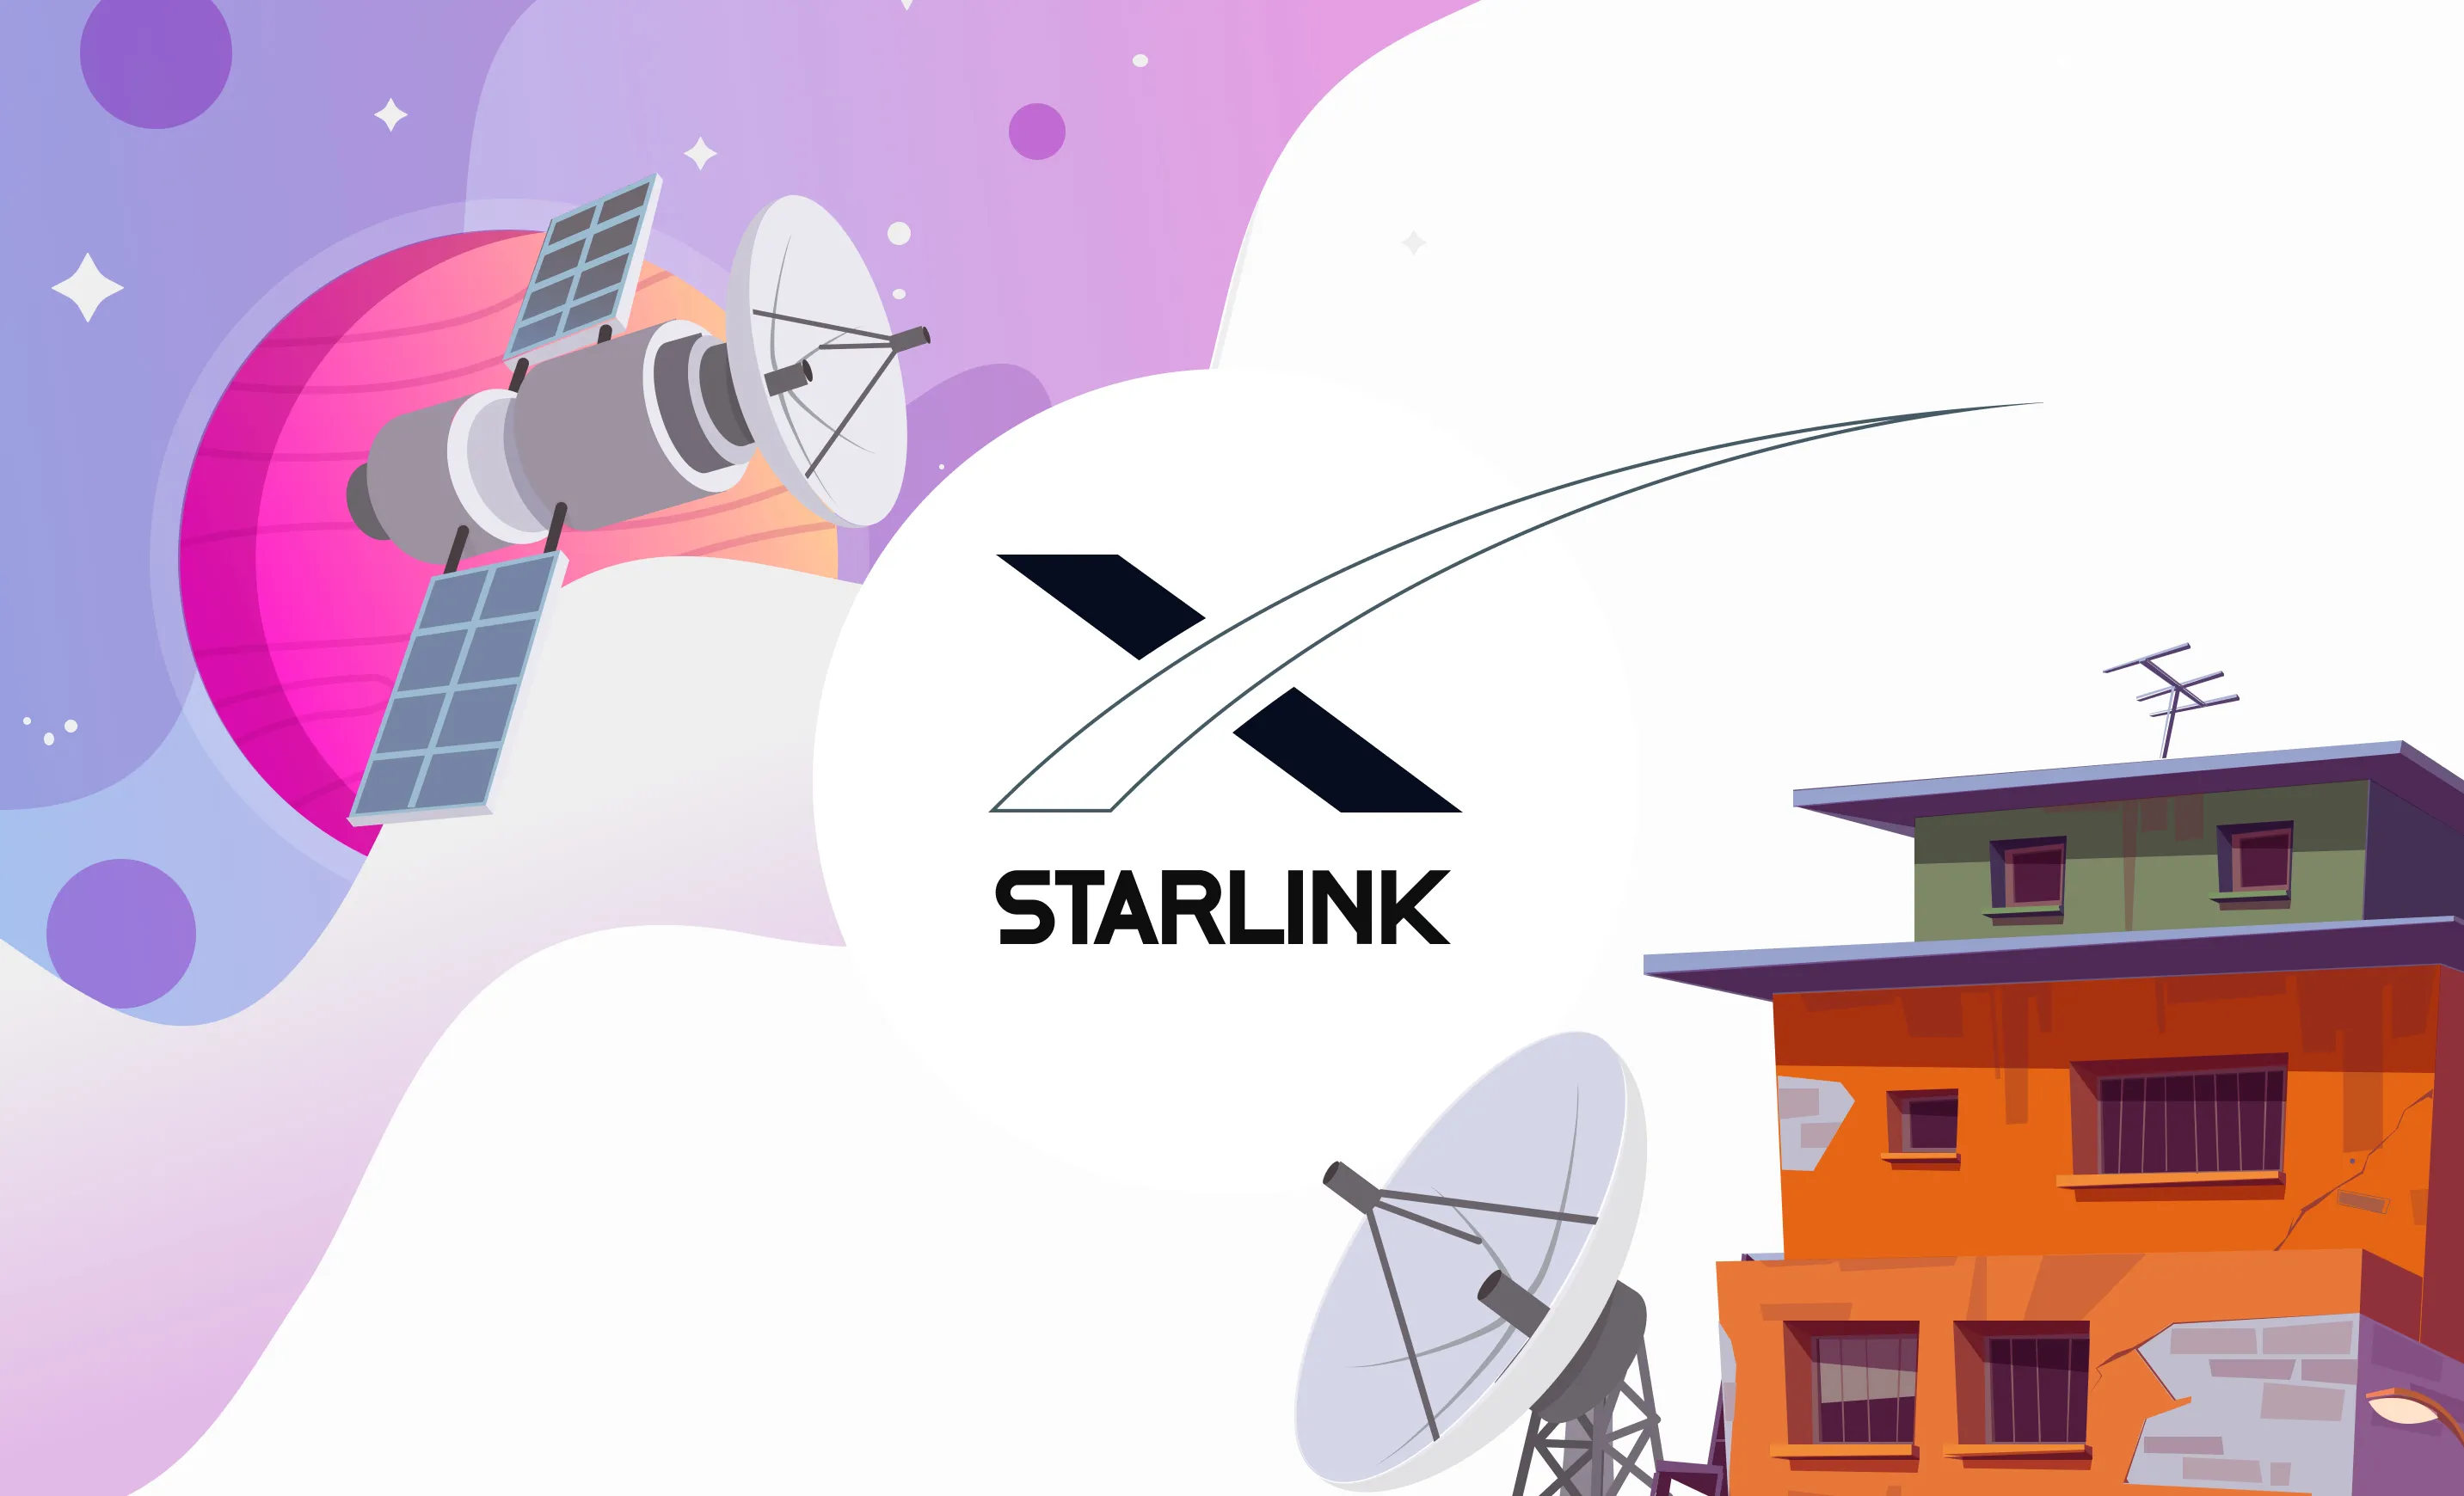 What is Starlink and how does it work